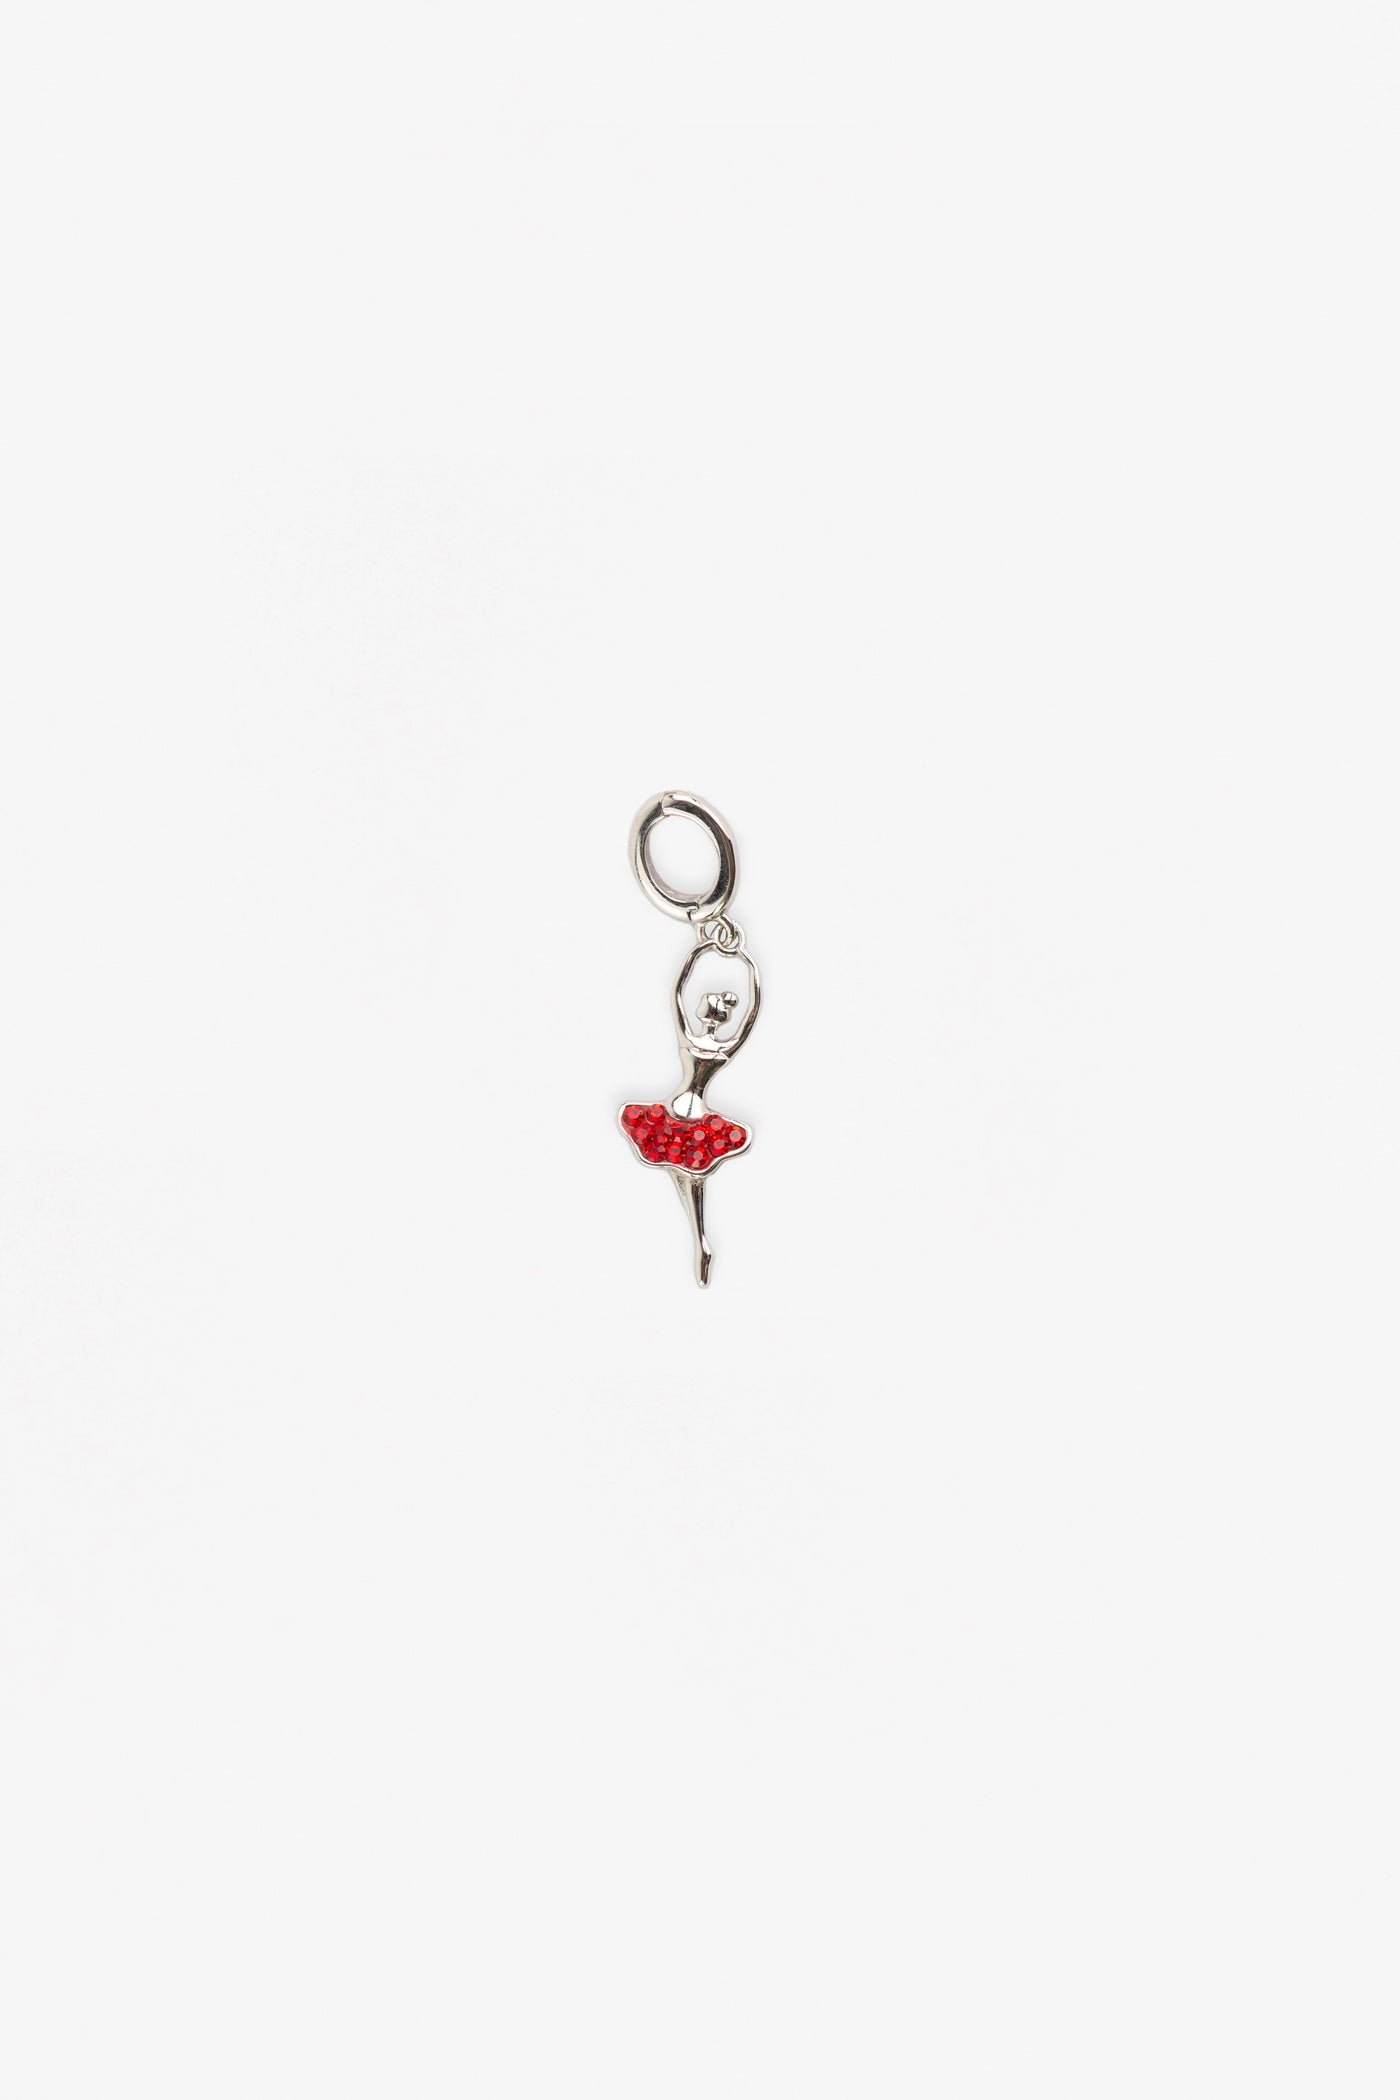 Ballerina Pirouette (Passé Pose) Crystal Sterling Silver Charm | Annie and Sisters